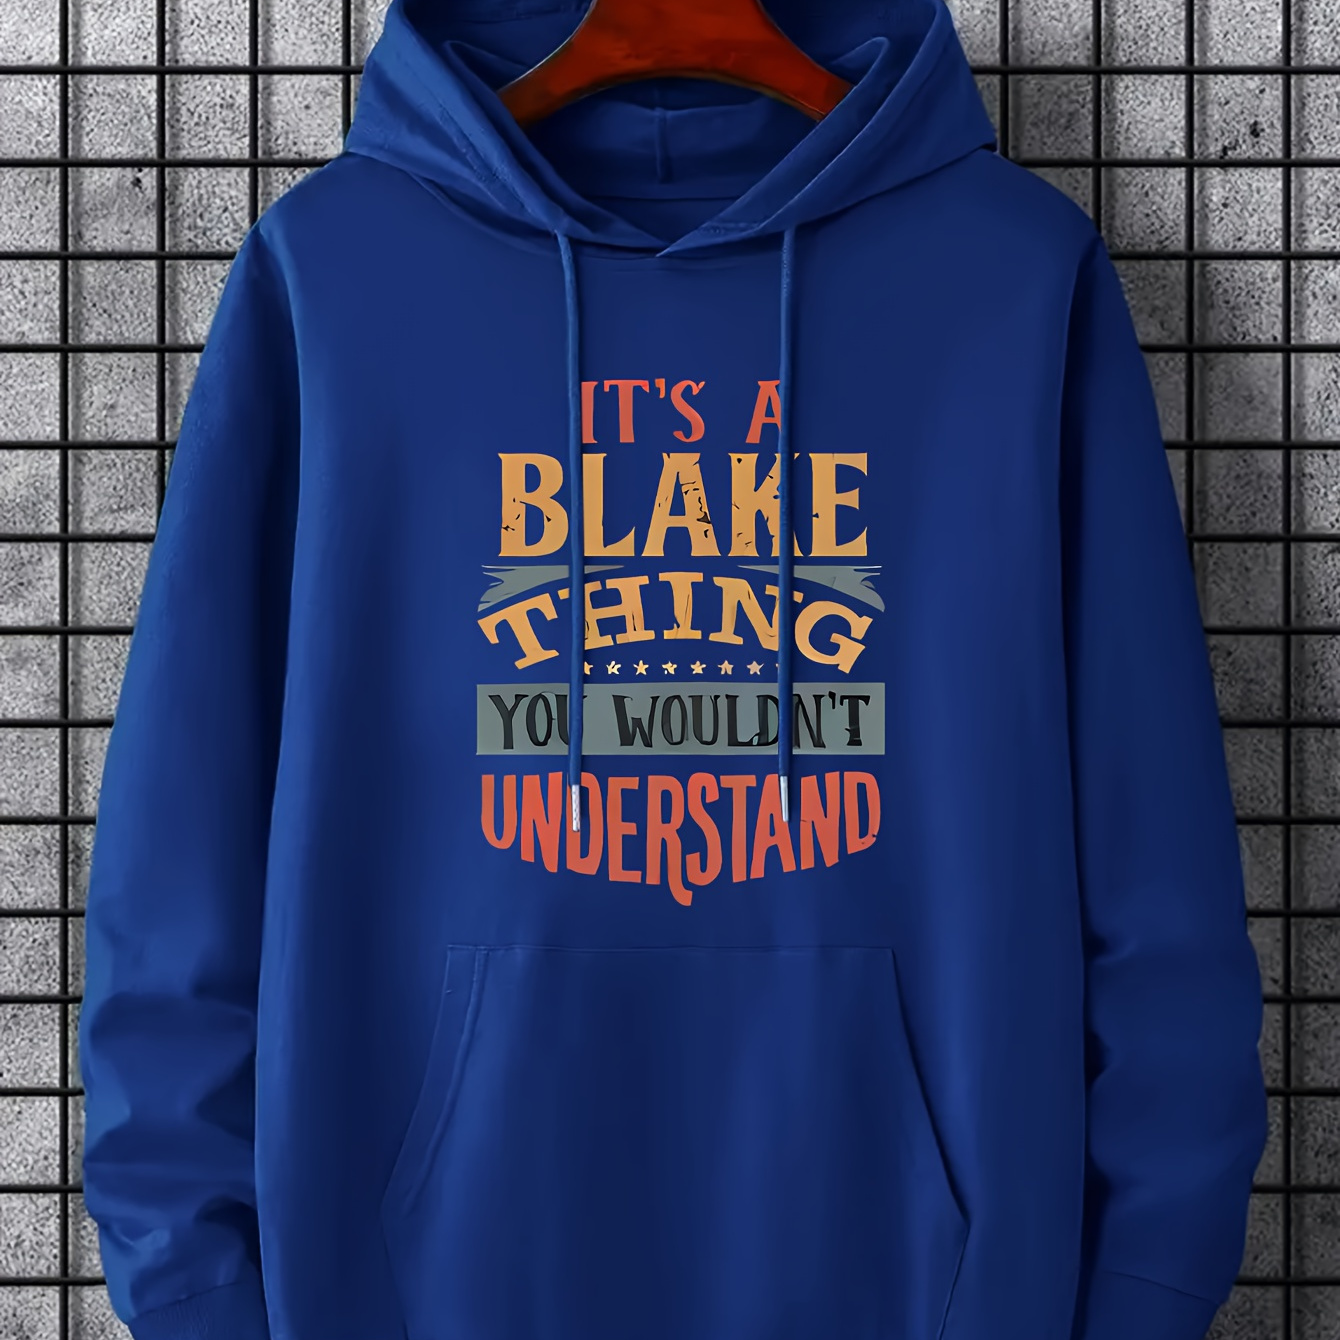 

It's A Blake Thing You Wouldn't Understand, Men's Letter Print Hoodie, Casual Slightly Stretch Breathable Drawstring Hooded Sweatshirt, Men's Clothing For Outdoor